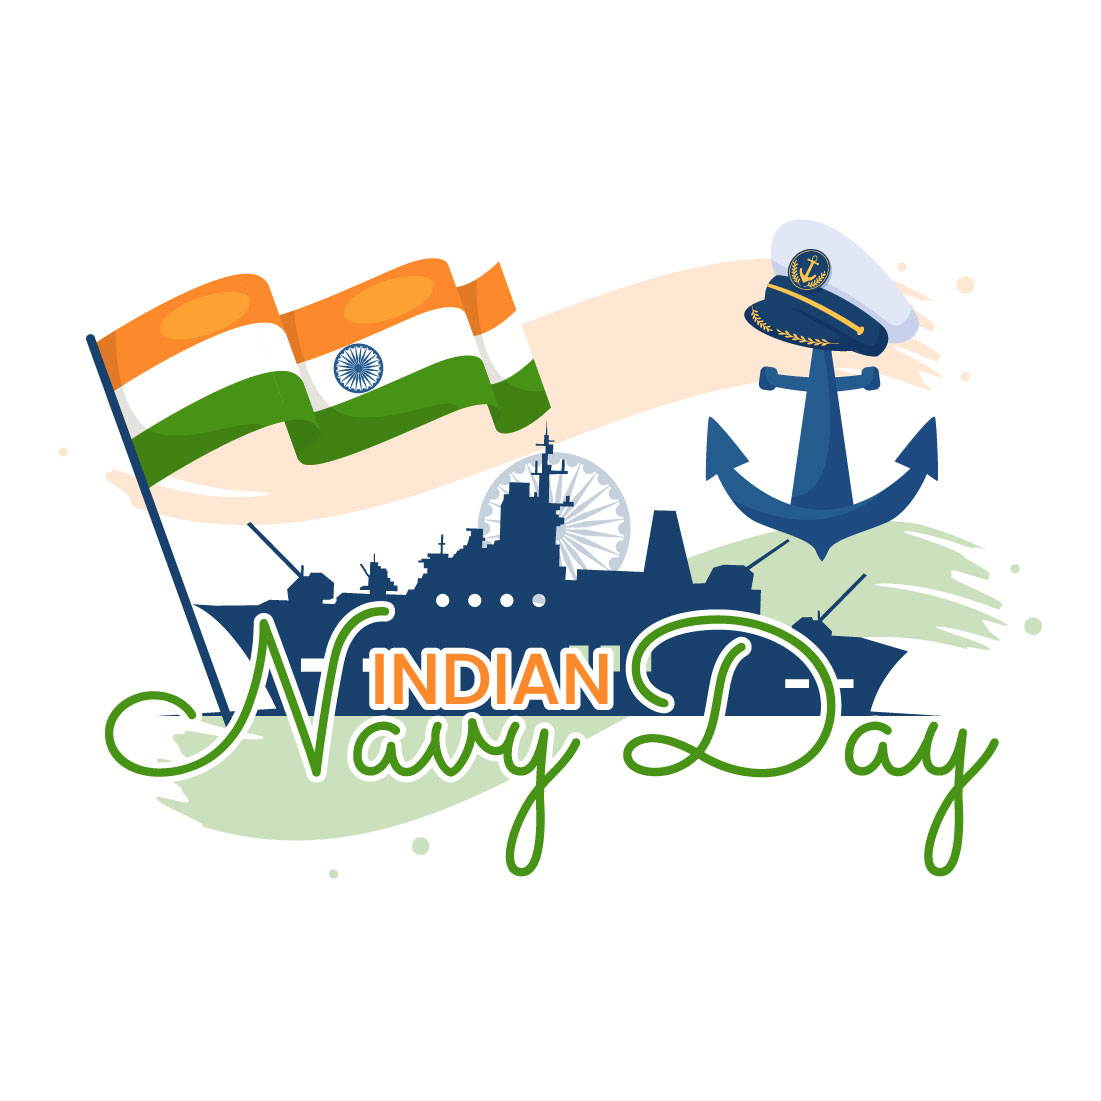 13 Indian Navy Day Illustration preview image.